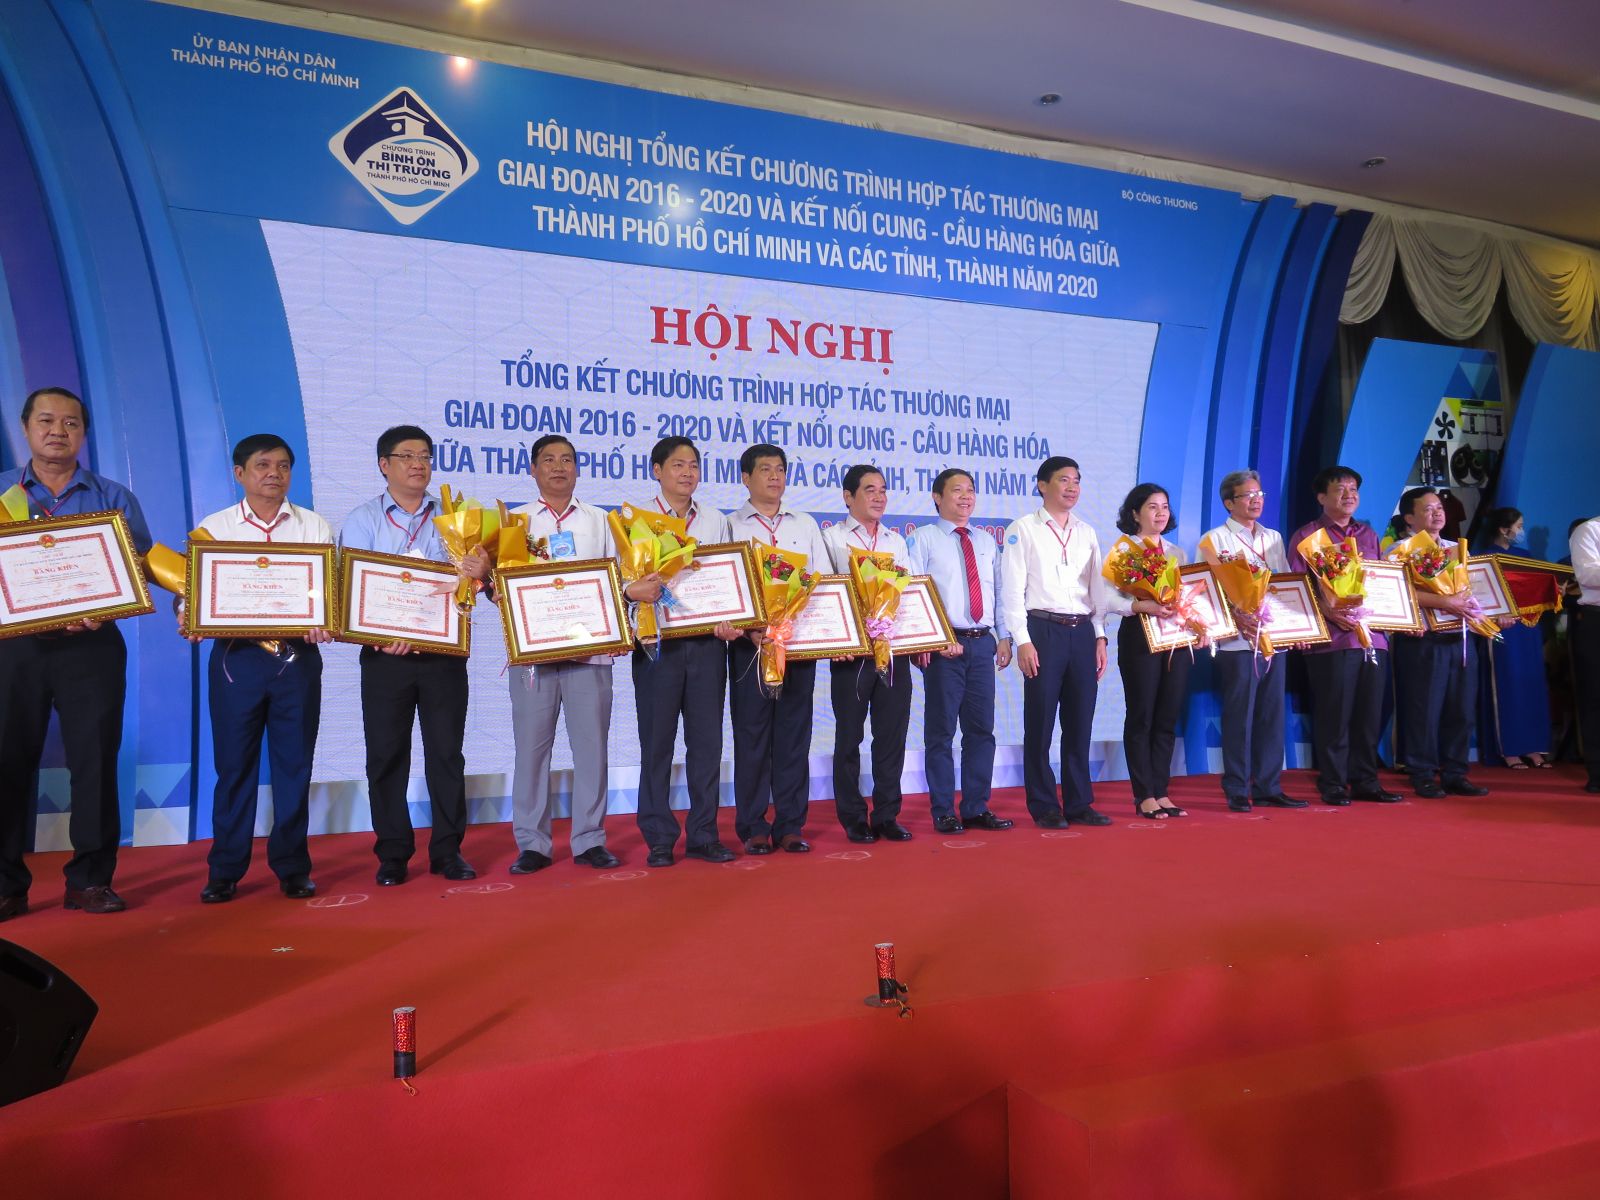 Ho Chi Minh City People's Committee awards Certificates of Merit to units actively implementing trade cooperation in the period 2016-2020 